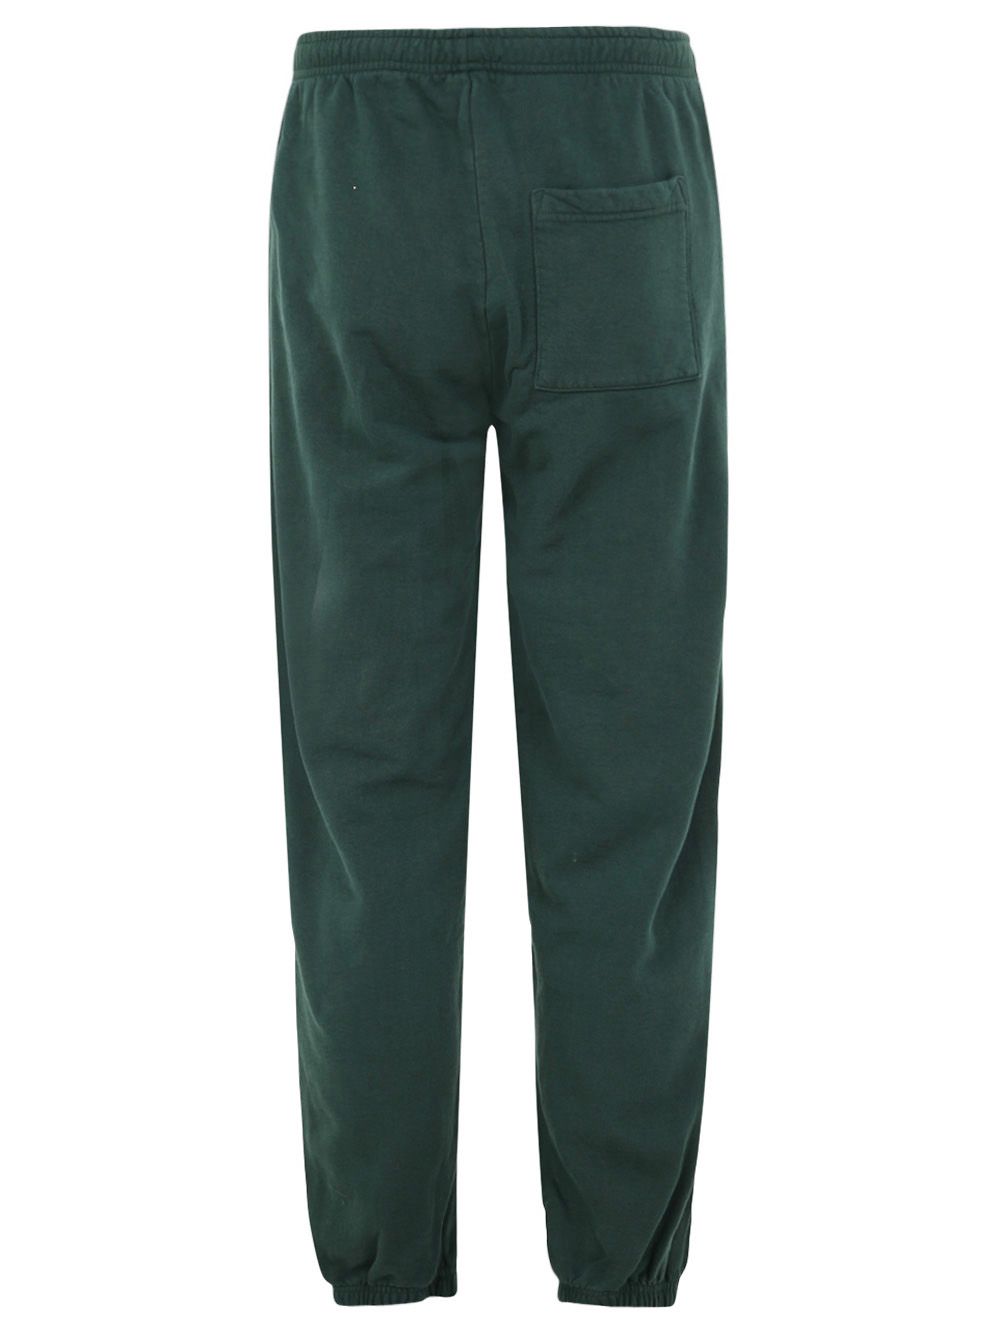 Shop Sporty &amp; Rich Beverly Hills Embroidery Sweatpant